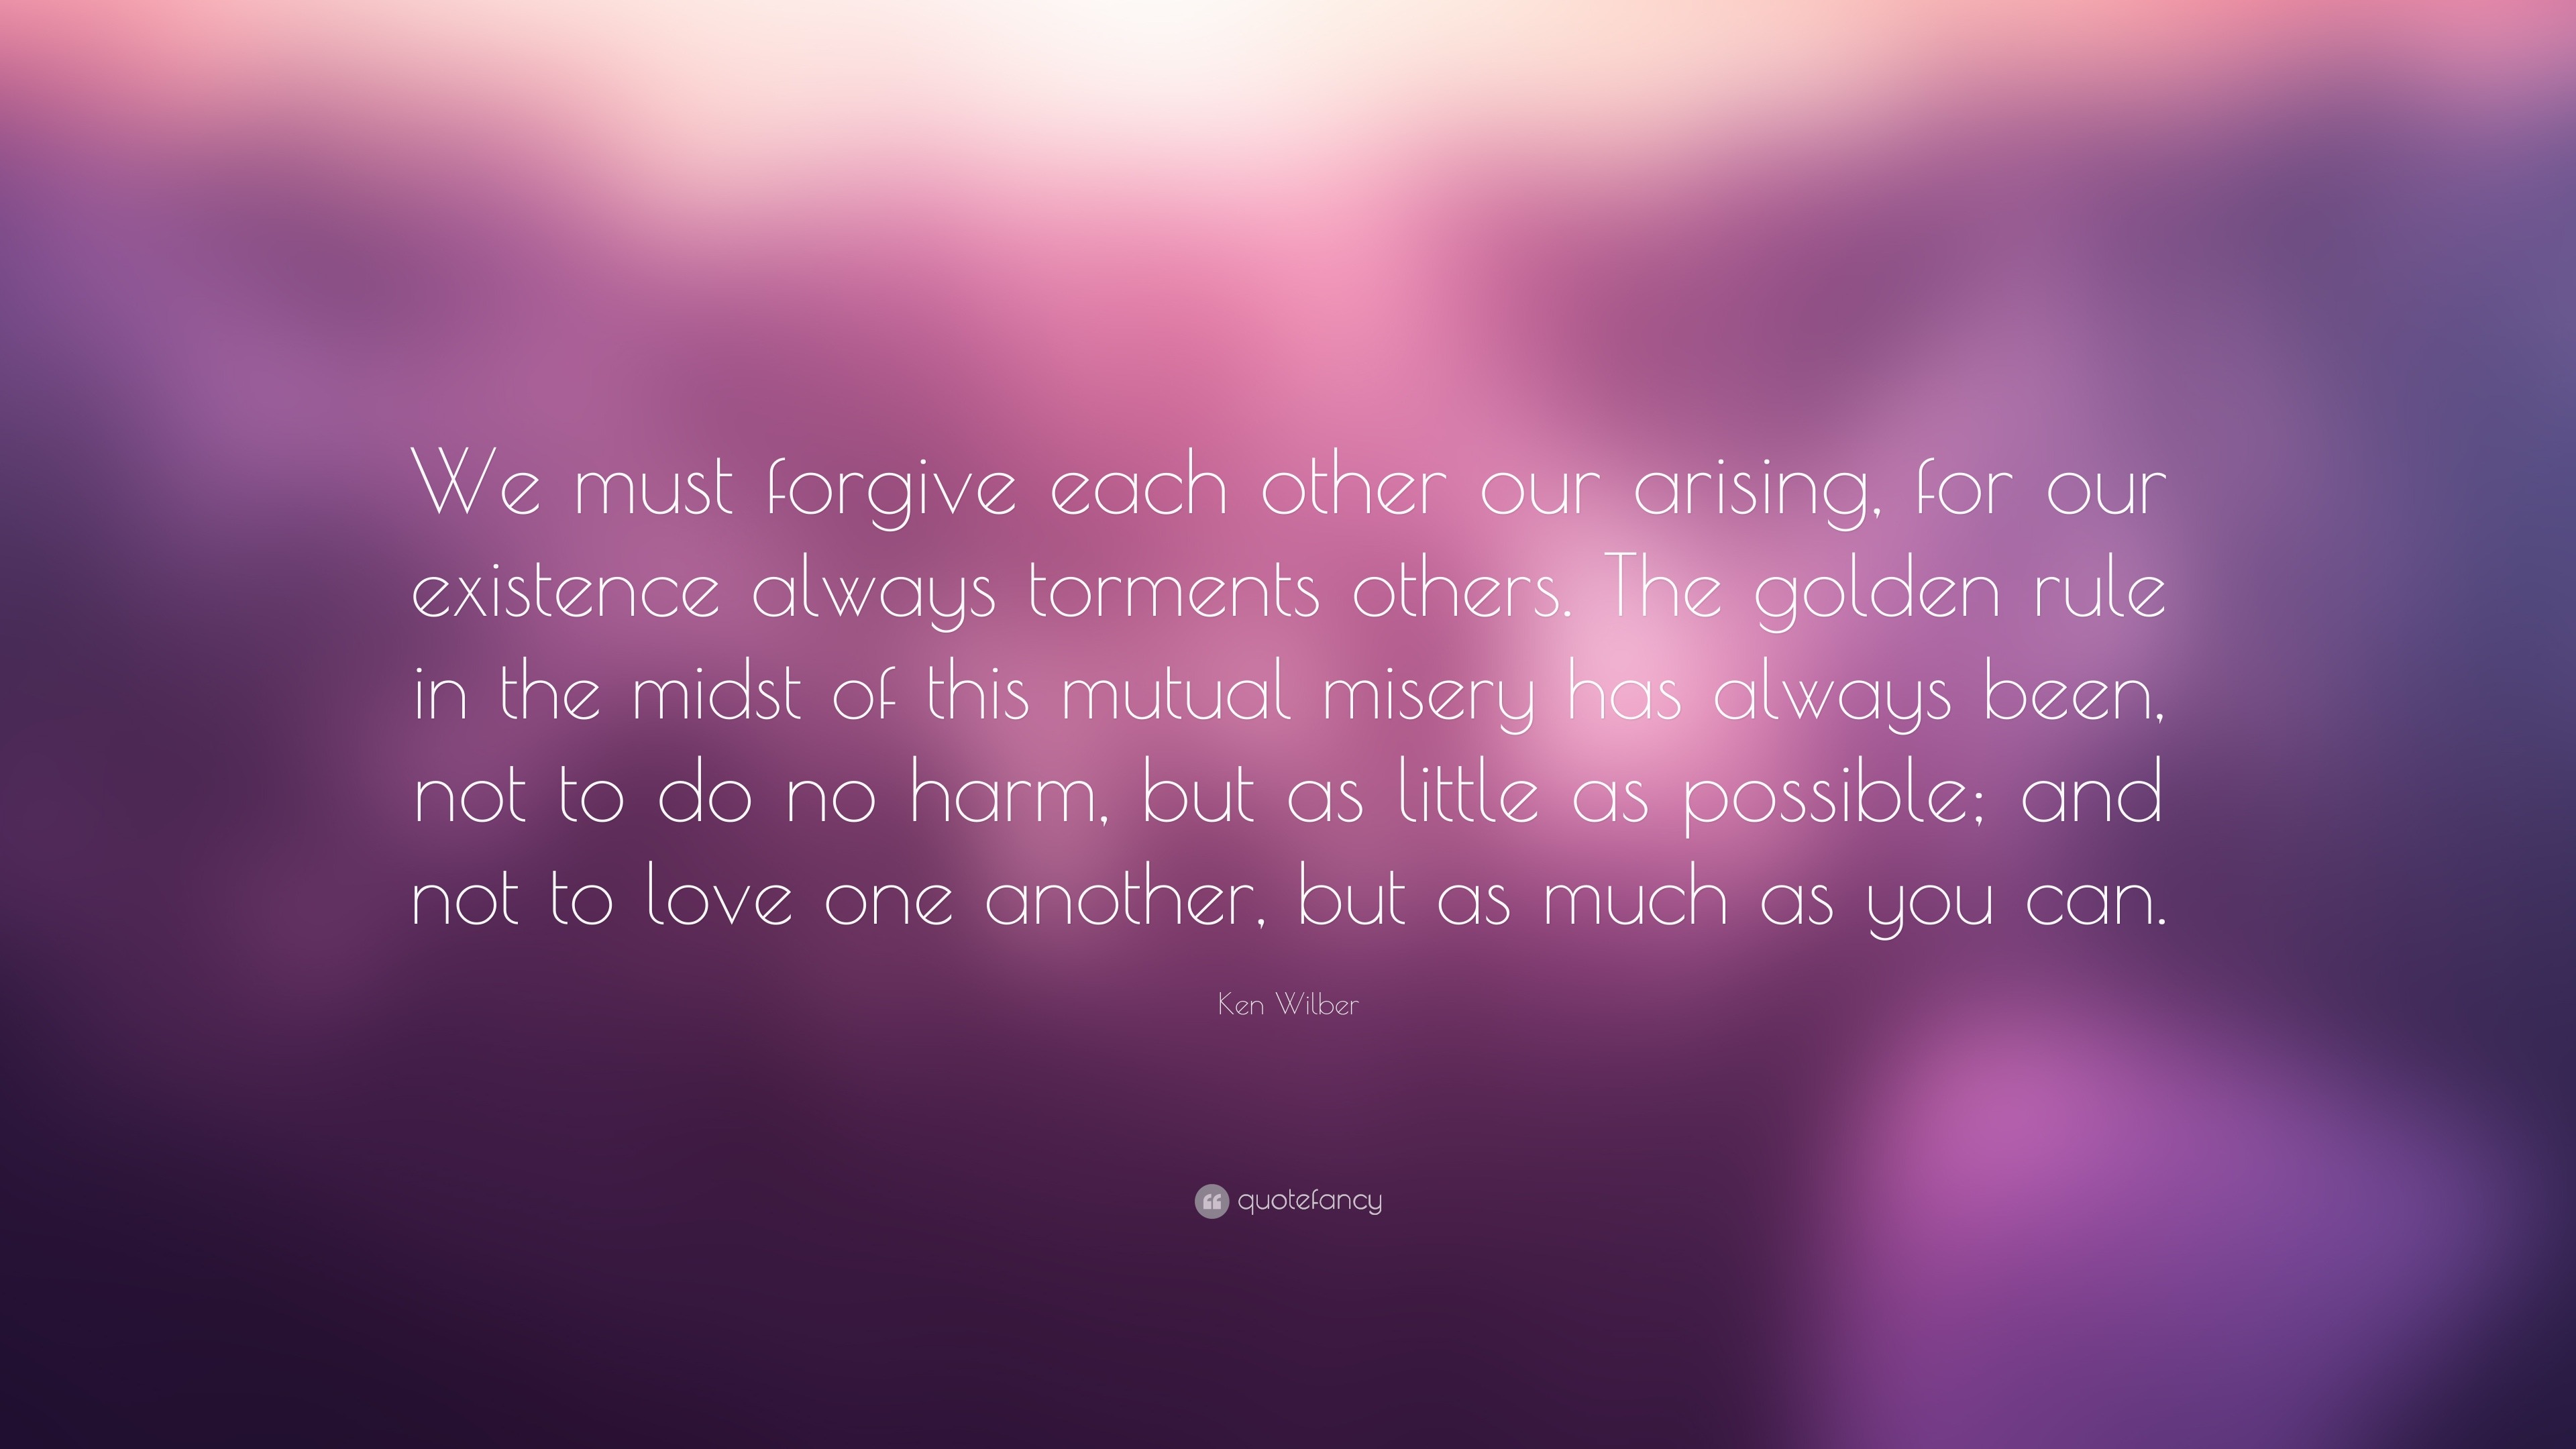 Ken Wilber Quote: “We must forgive each other our arising, for our ...